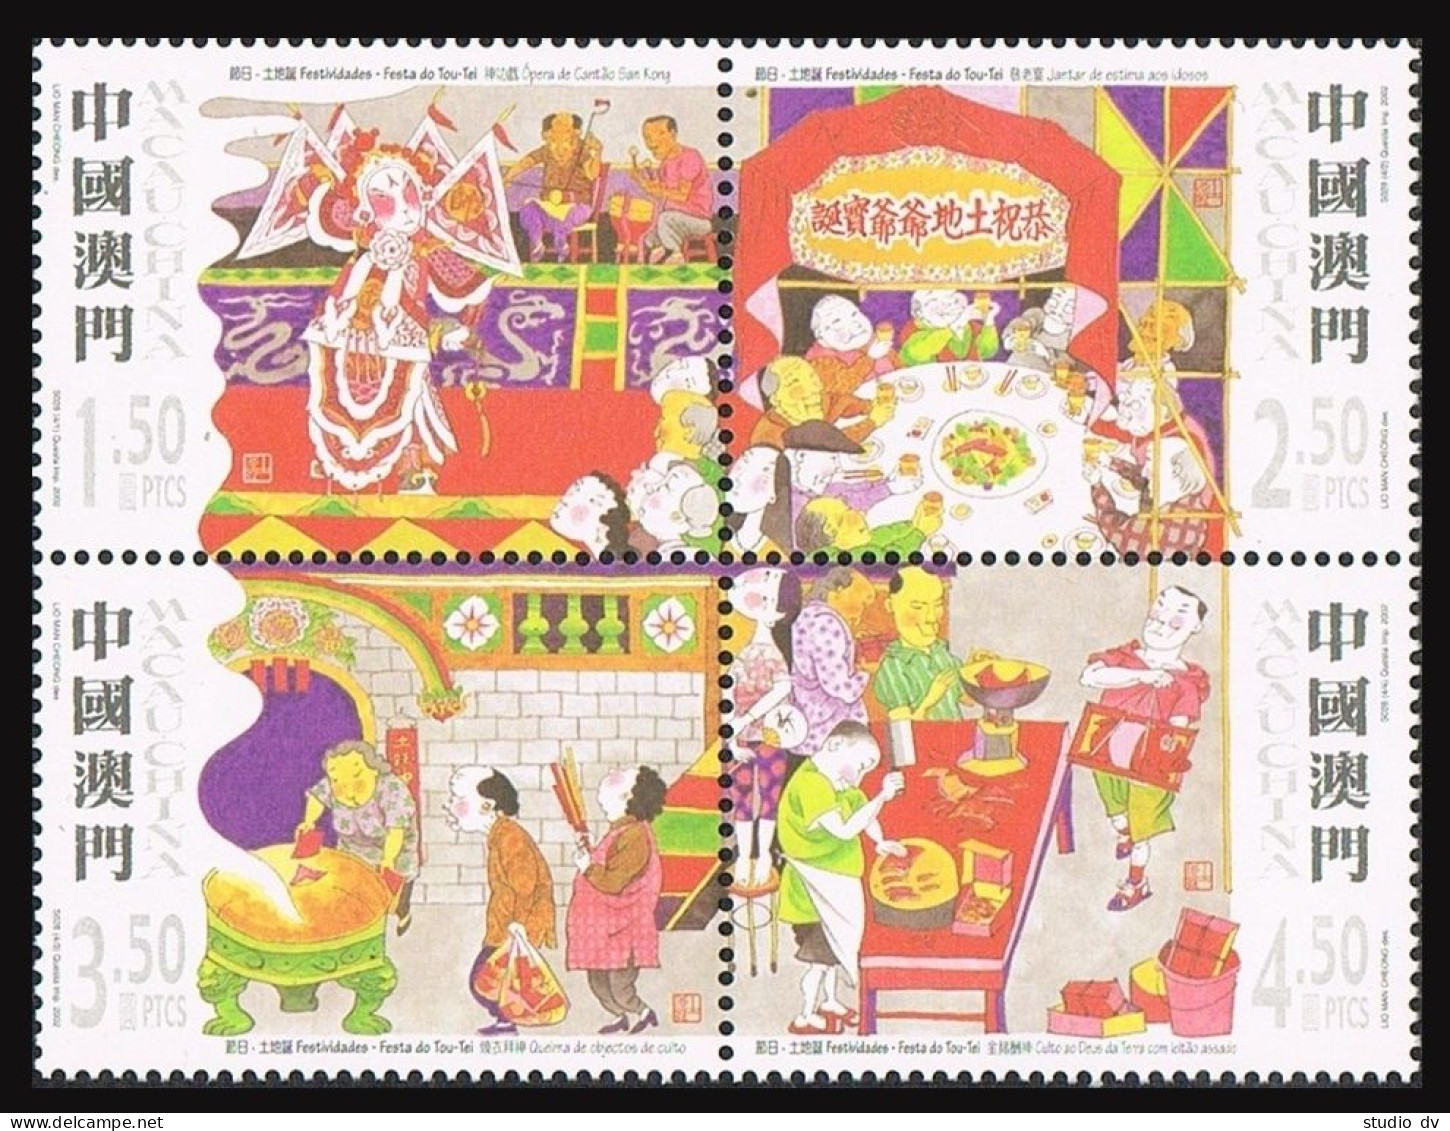 Macao 1086 Af Block,MNH. Tou-tei Festival, 2002.Opera,Dinner,Religious Objects, - Neufs